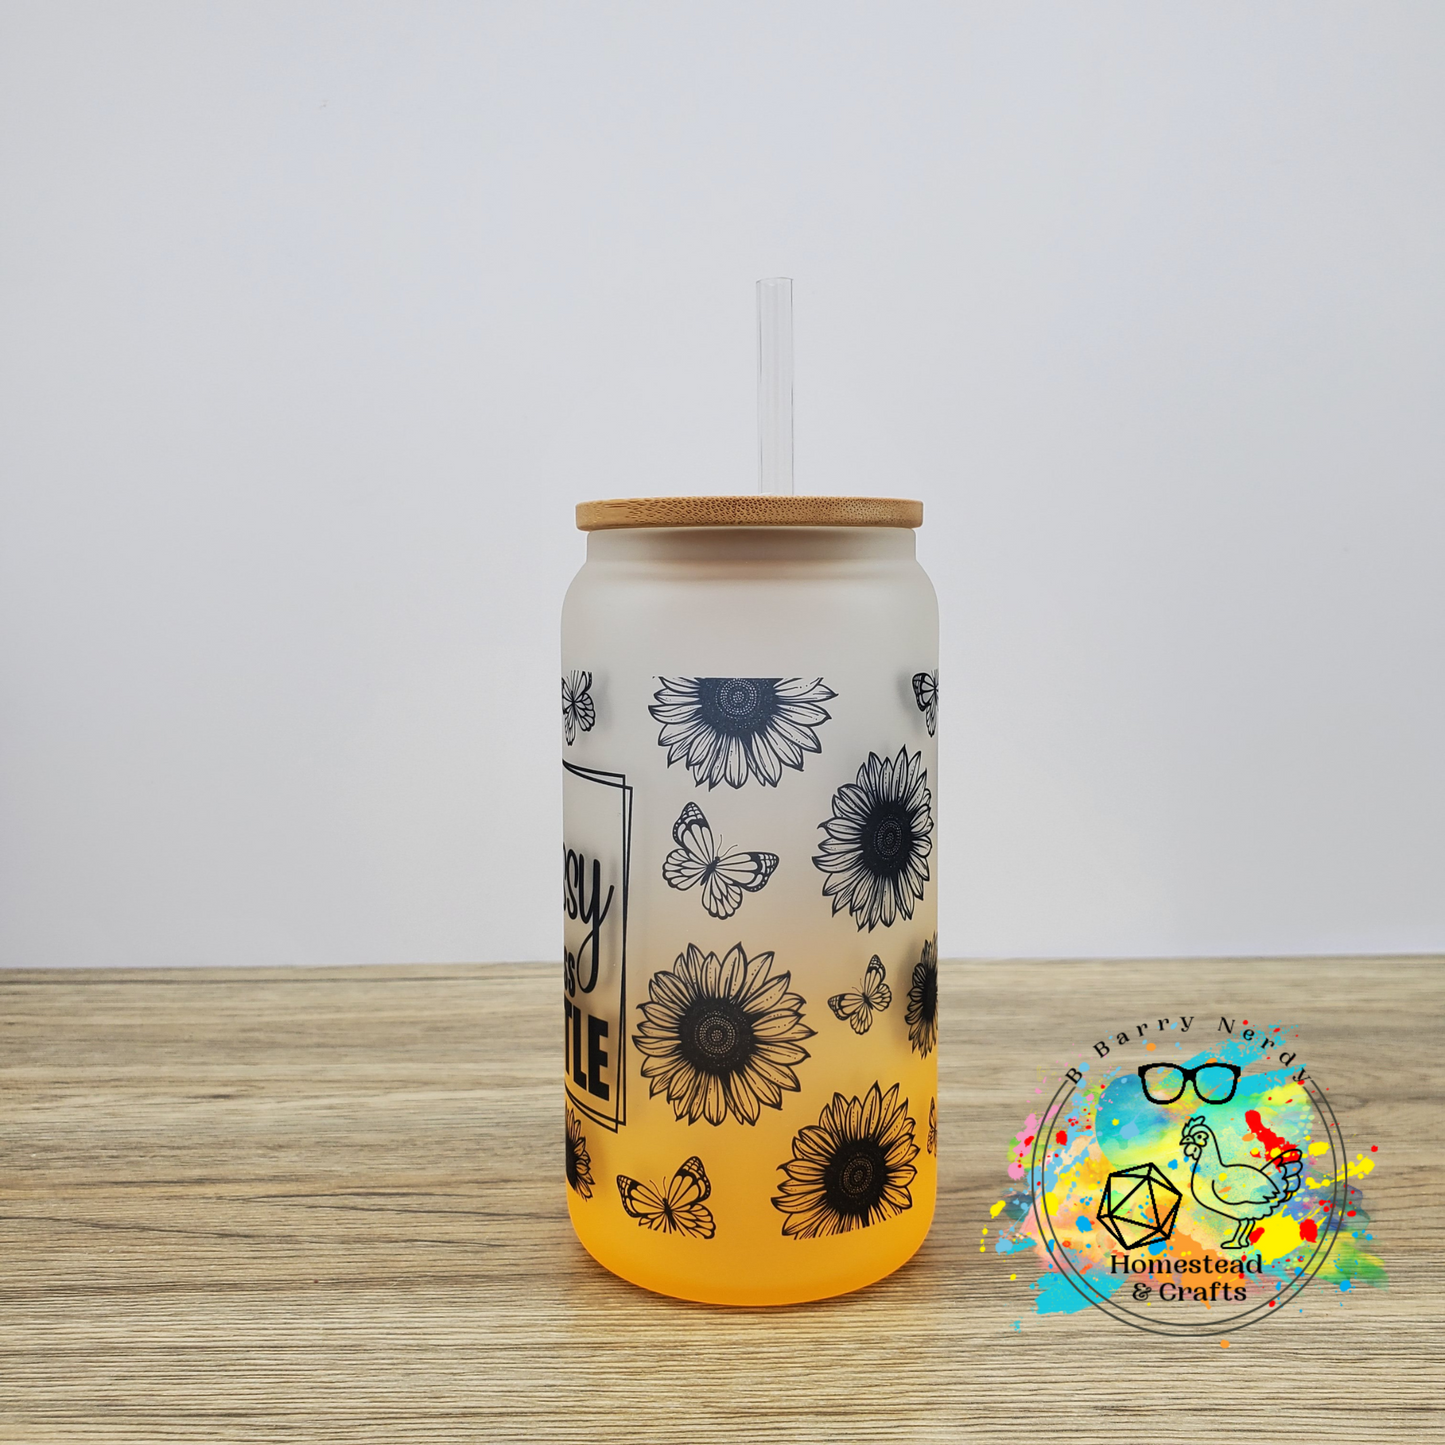 Classy but Cuss a Little, 16oz Sublimated Glass Can